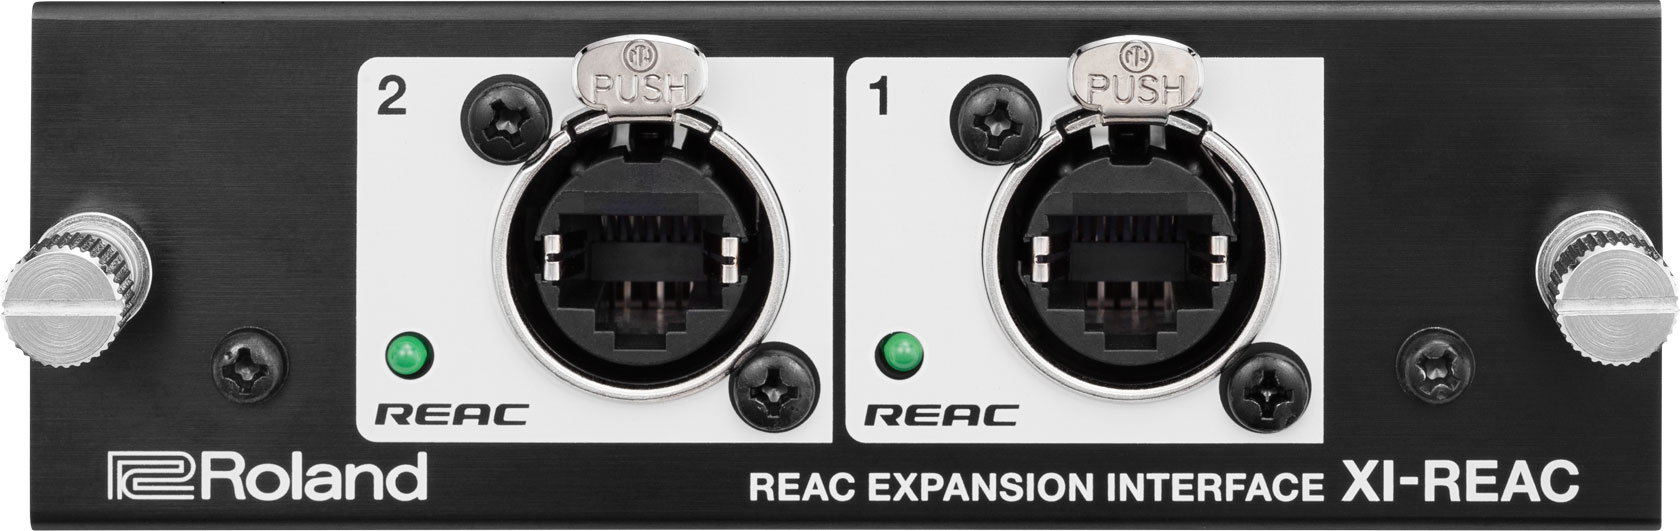 NMK Solutions XI-REAC